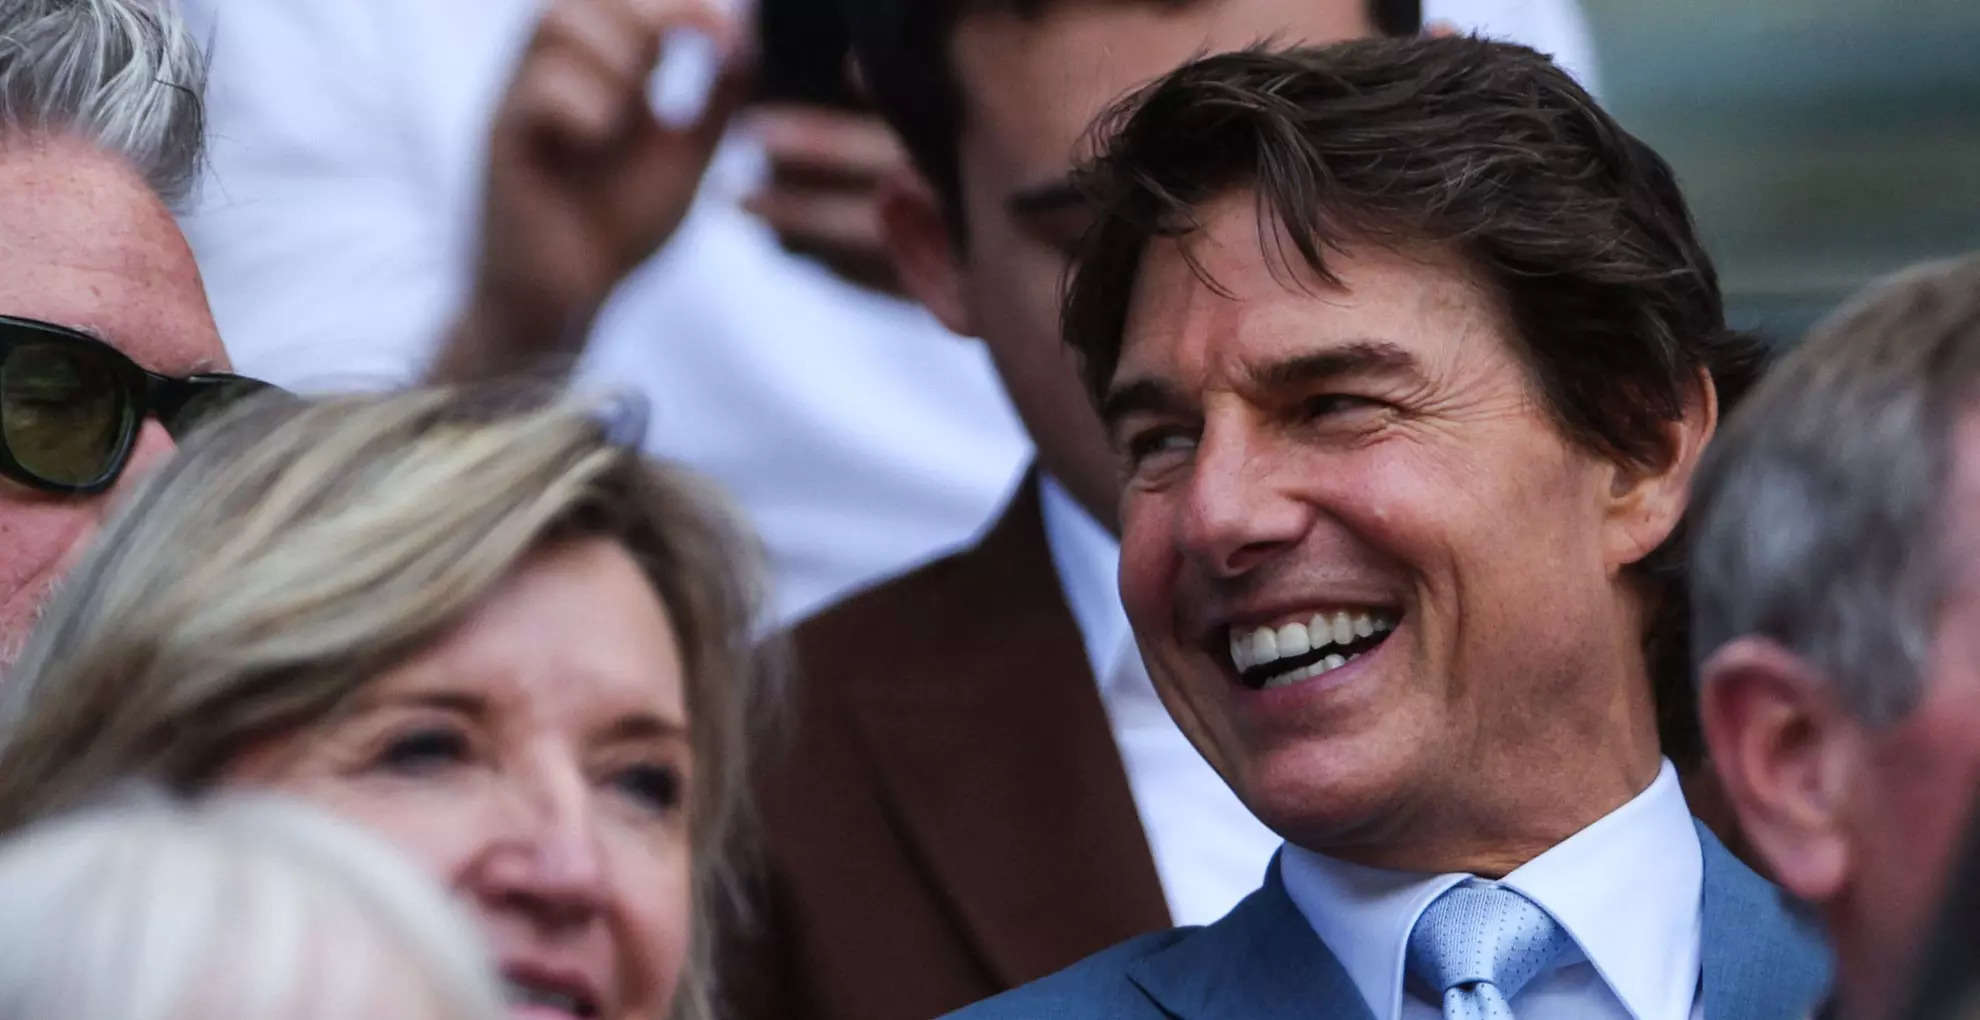 In Pics: Tom Cruise, Kate Winslet led the celebs quotient at Wimbledon 2022 finals  | The Times of India